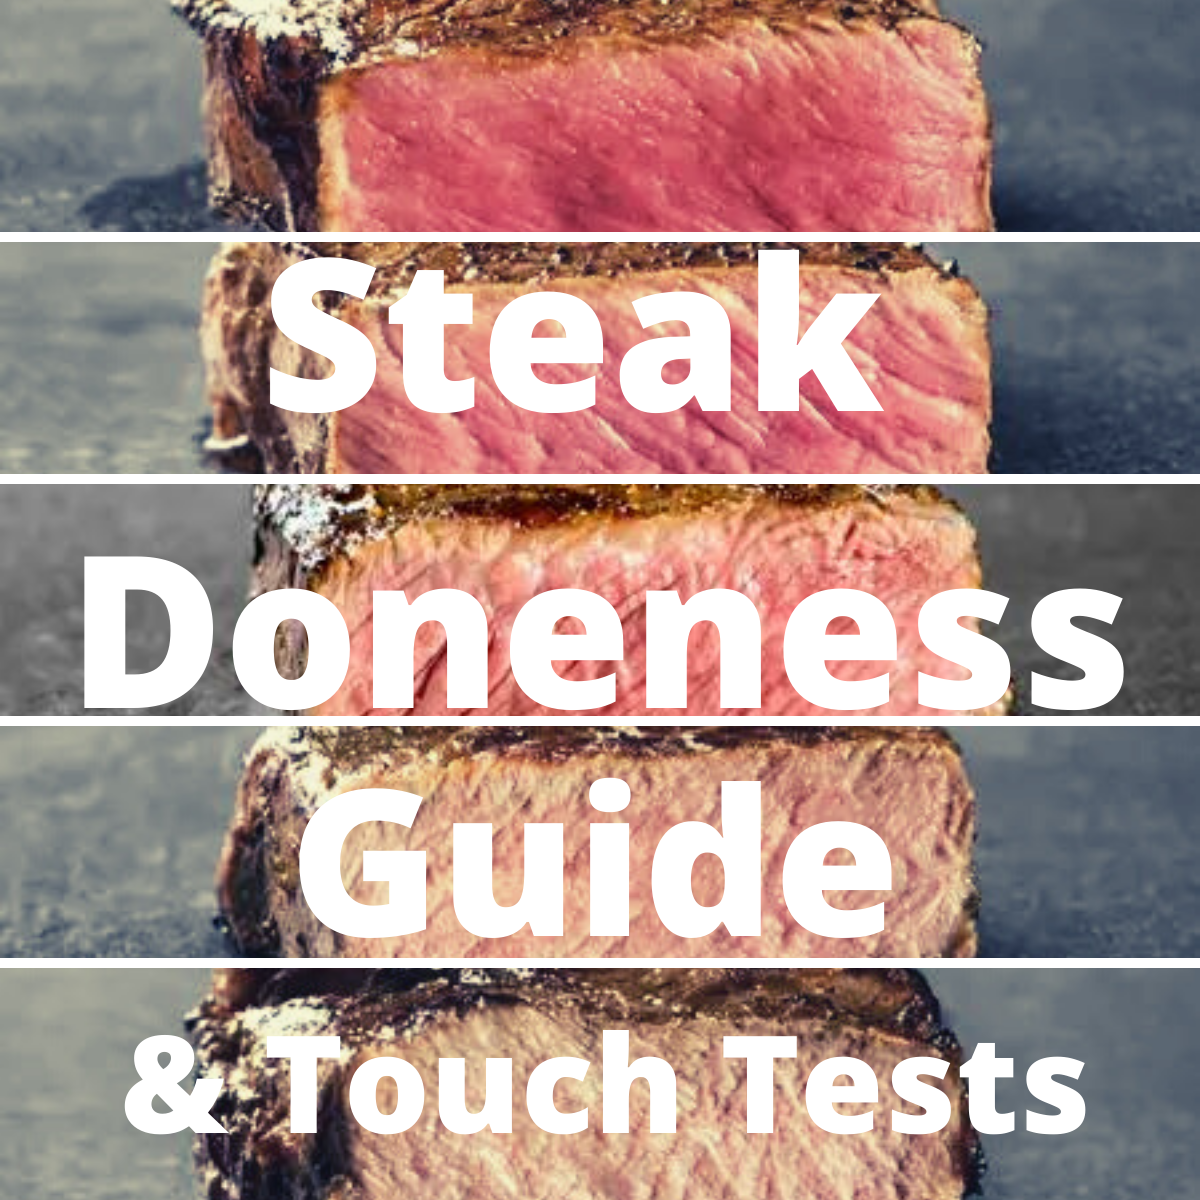 The Real Reason You Actually Do Need A Meat Thermometer